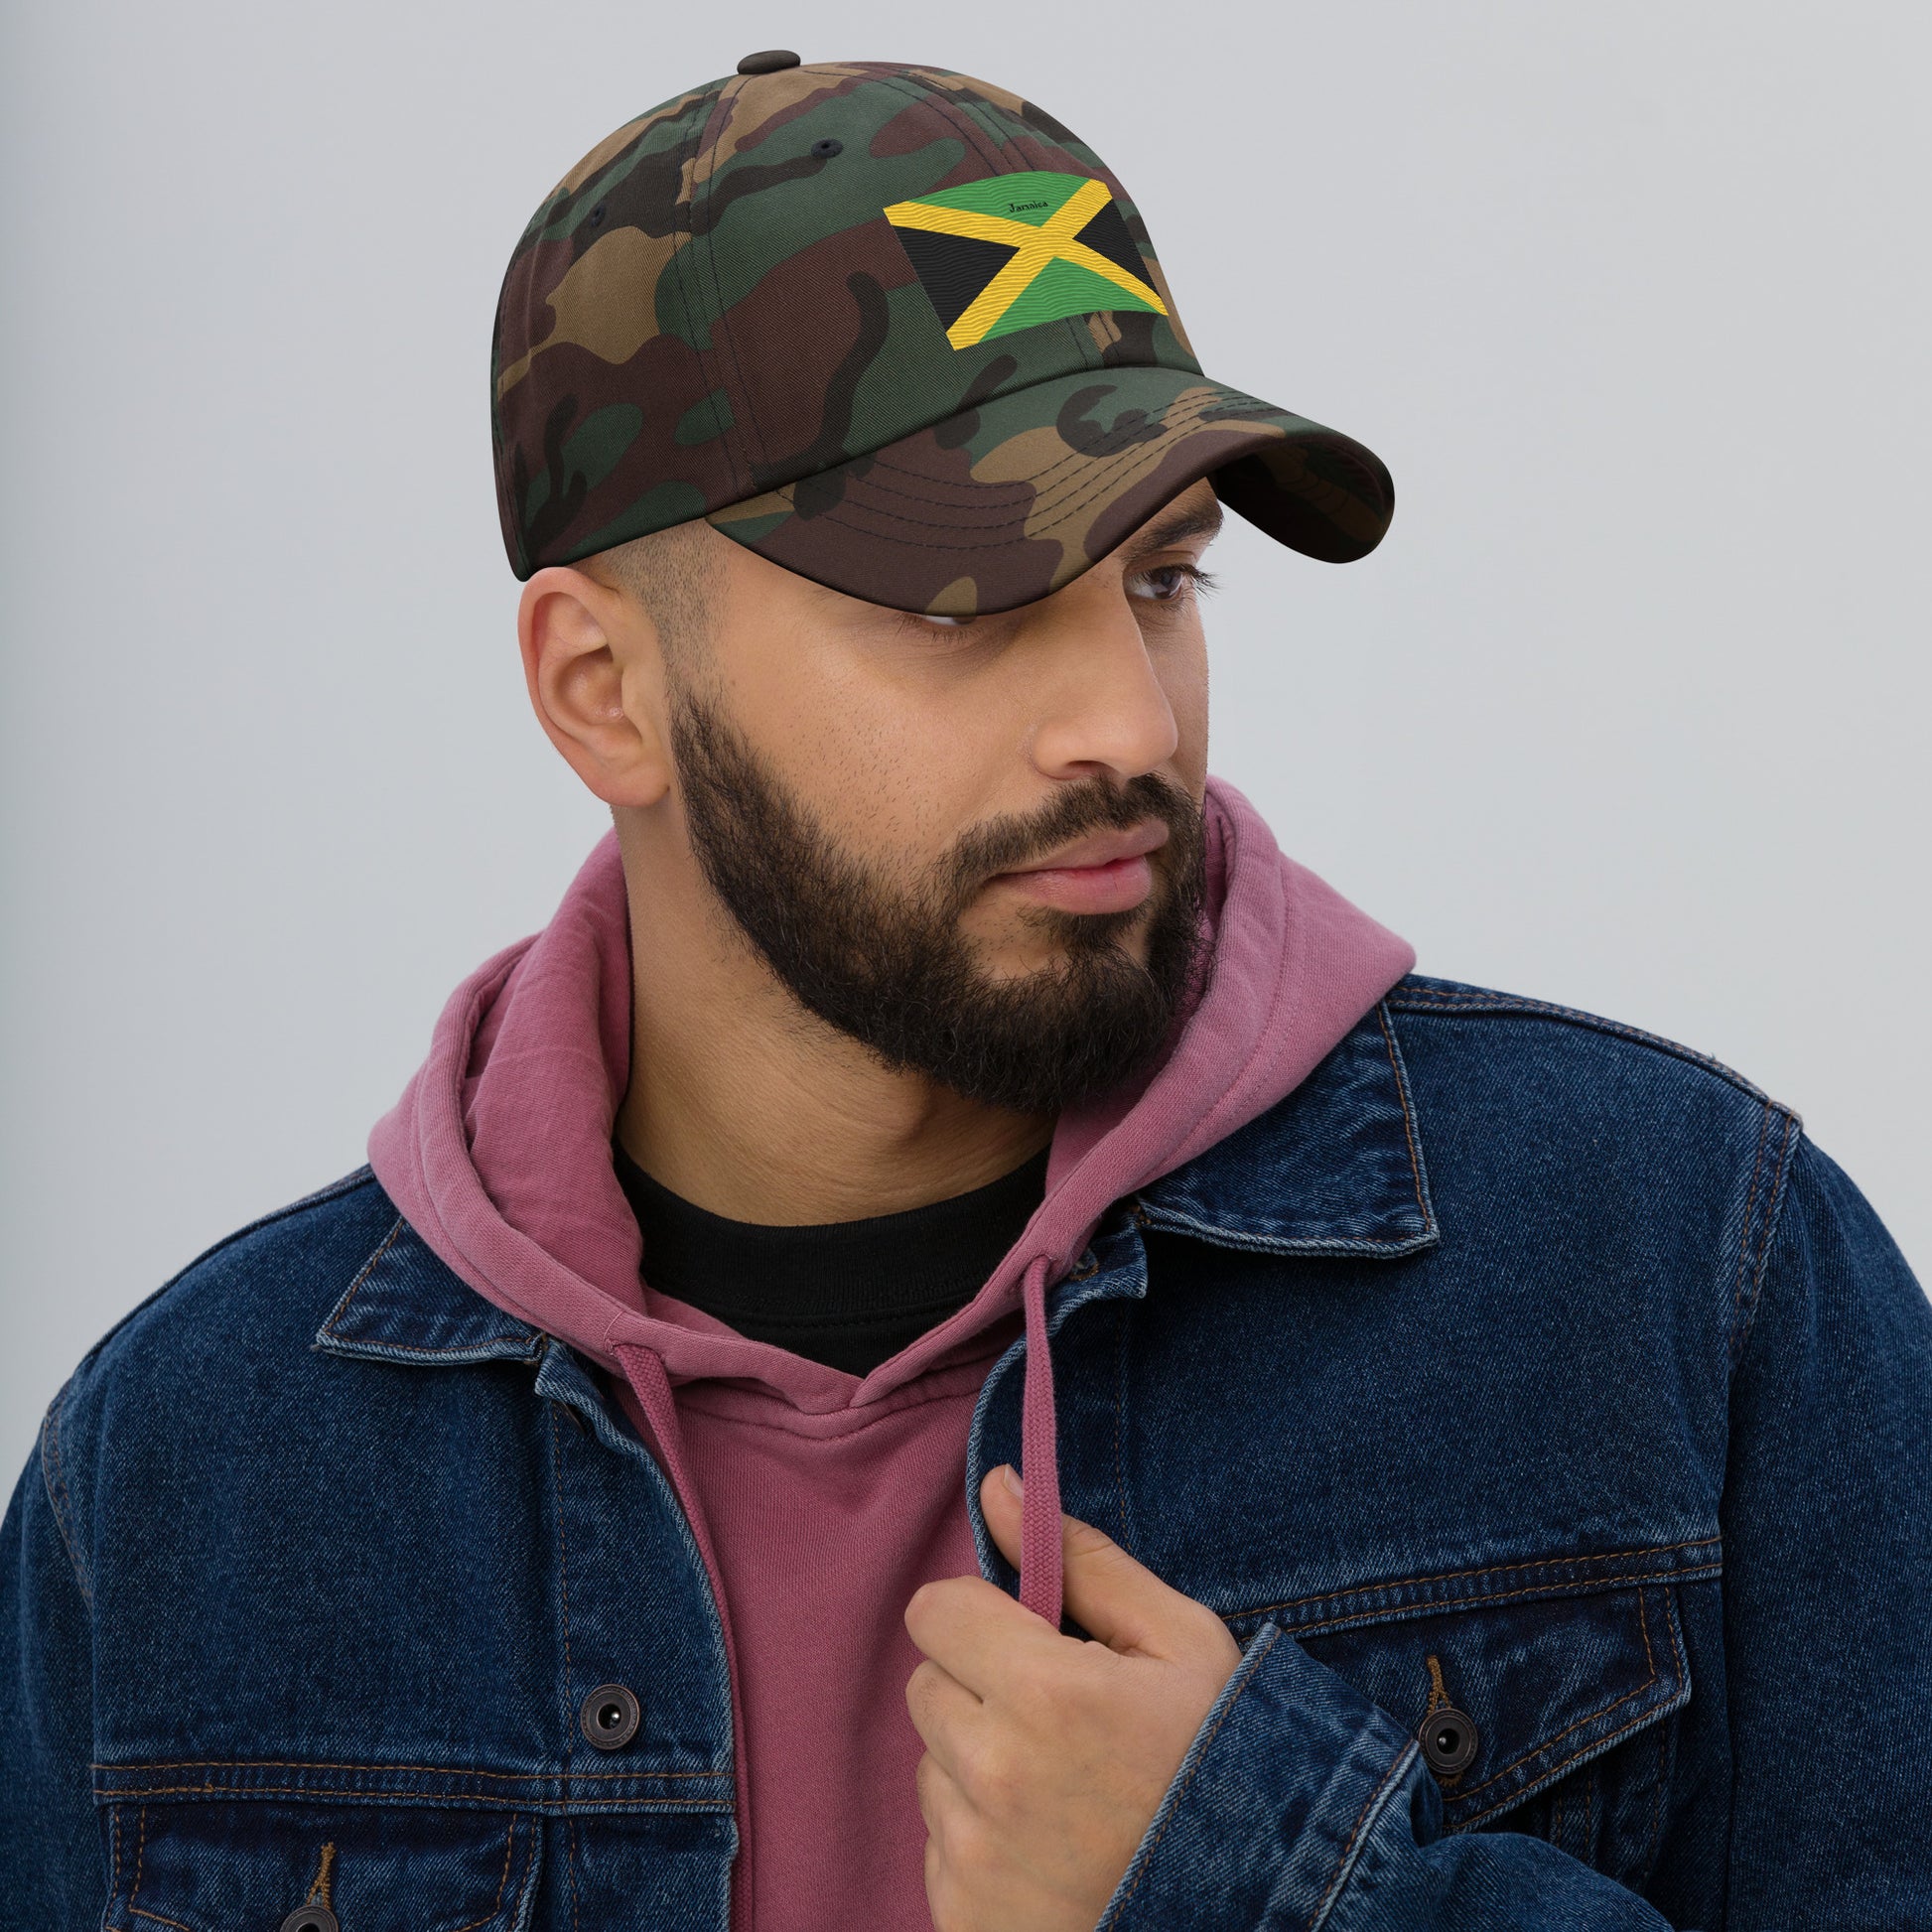 Dad hat embroidered with Jamaican flag - perfect for travel